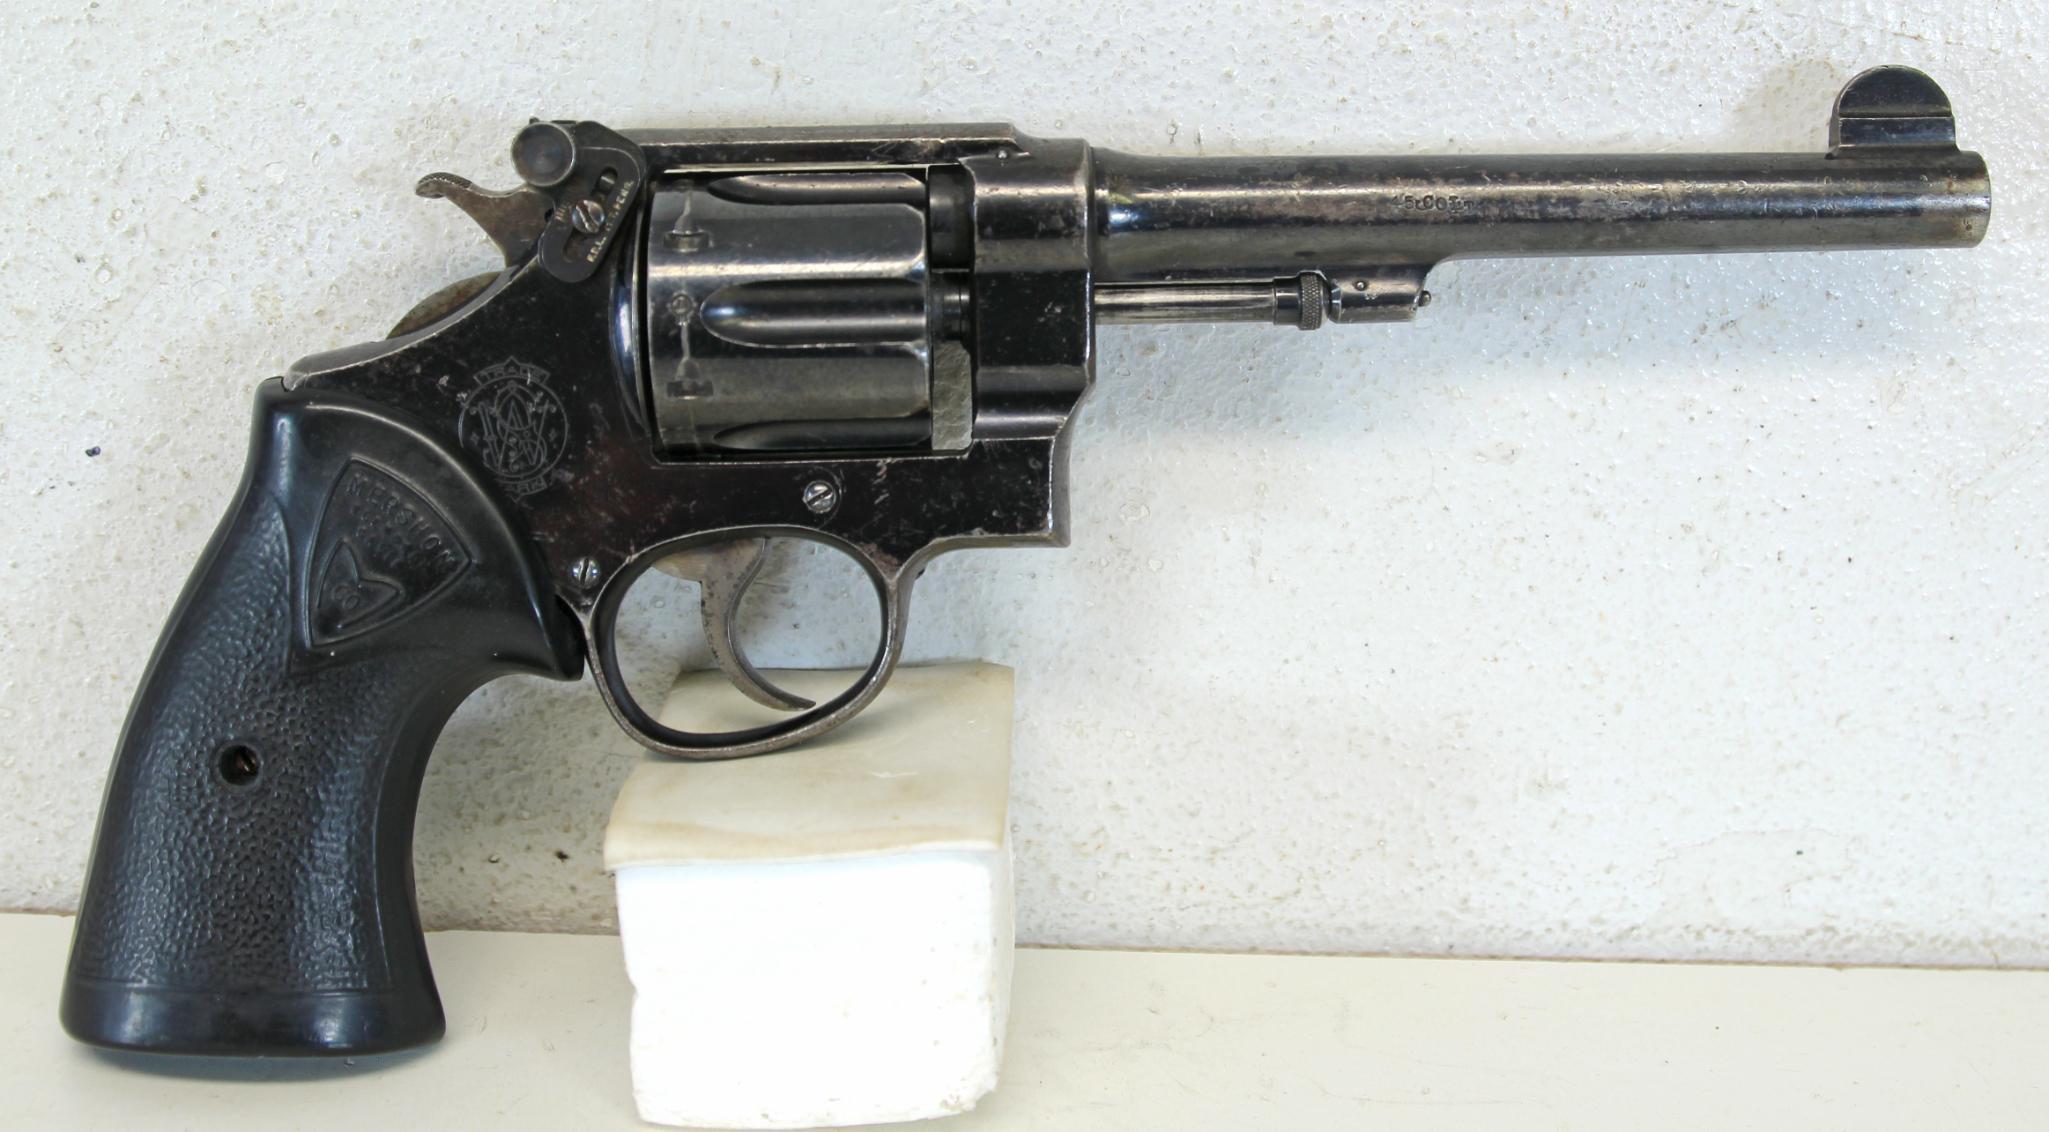 Smith & Wesson 1917 Lend Lease .45 Colt or .45 ACP with Moon Clips Double Action Revolver Not